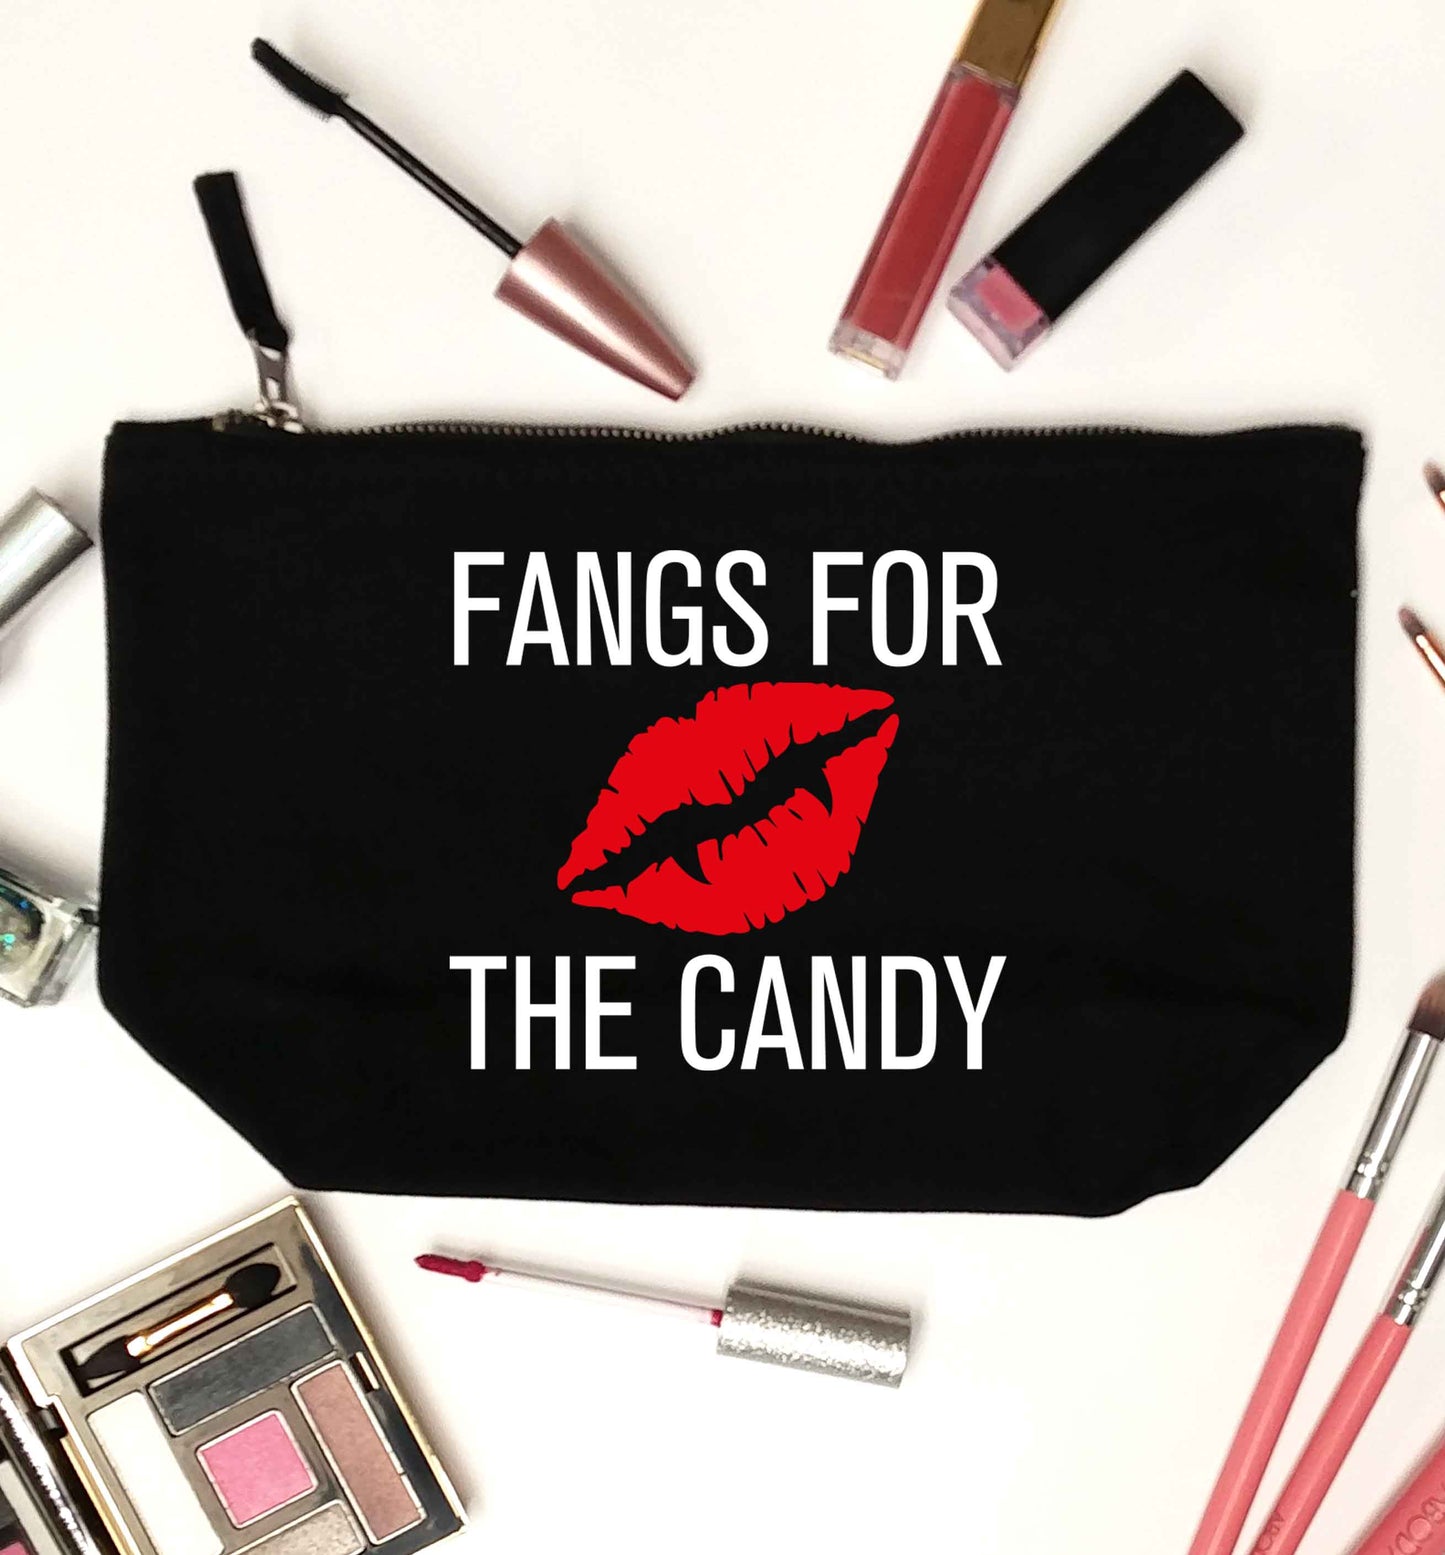 Fangs for the candy black makeup bag